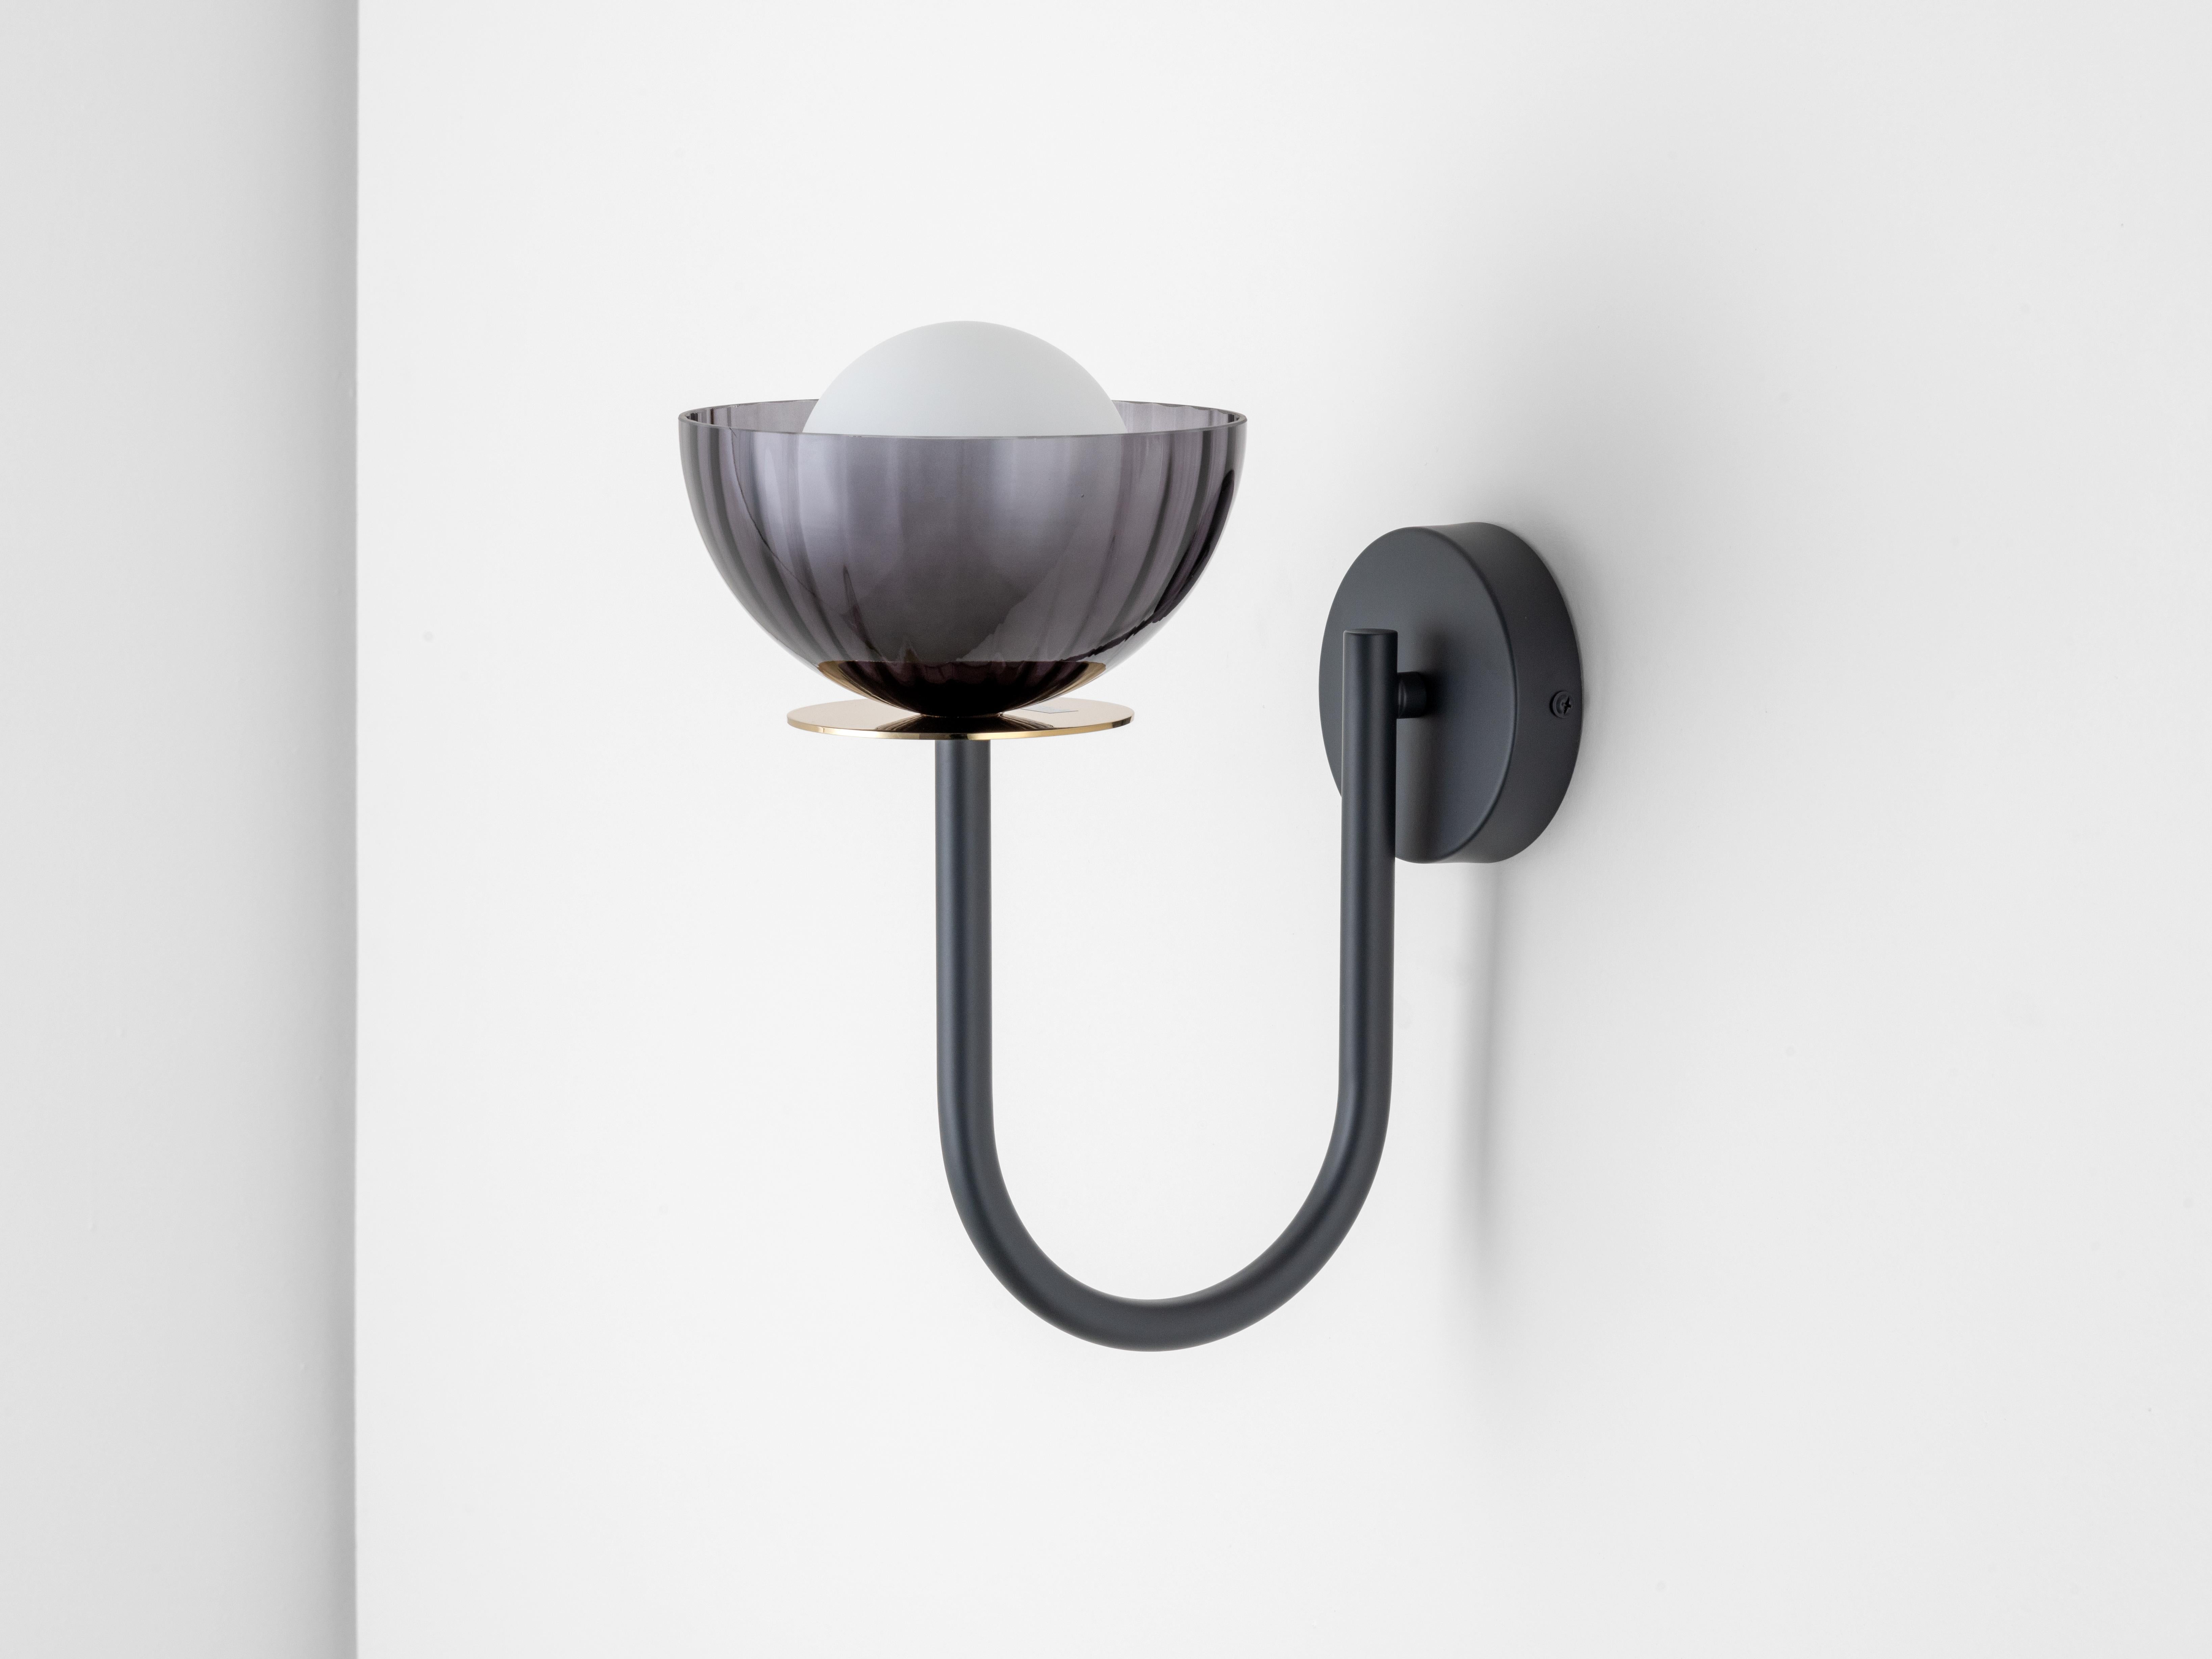 An elegant curved metal arm raises a smoked ribbed glass bowl a top a luxurious brass plate to create this slender, space saving yet stylish wall mounted light. Within the bowl, our iconic opal orb glass shade, combining shapes and finishes into a